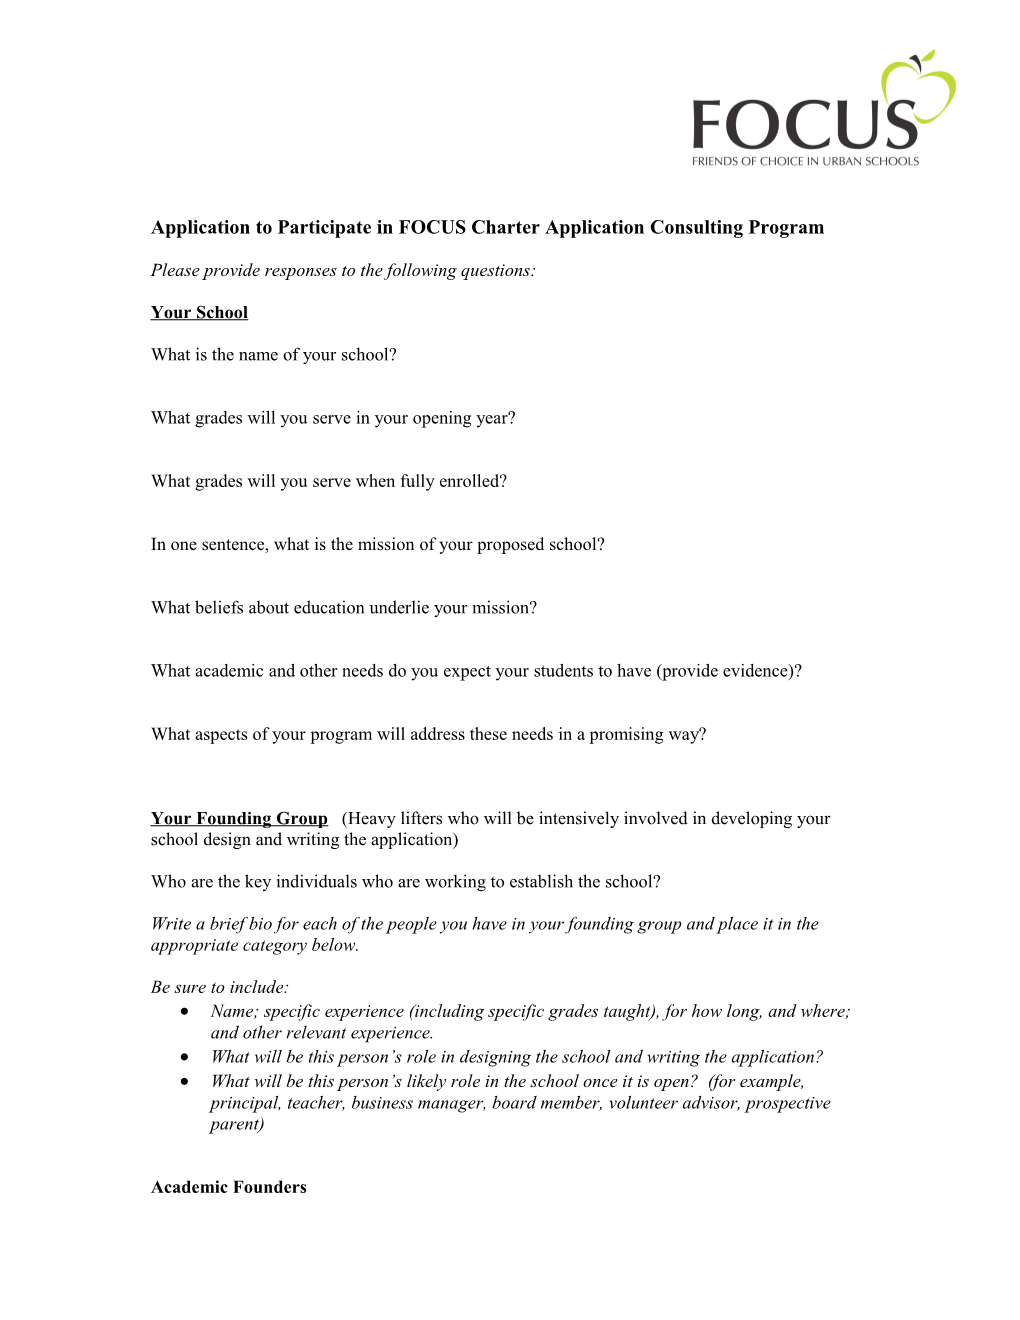 Application to Participate in FOCUS Charter Application Consulting Program